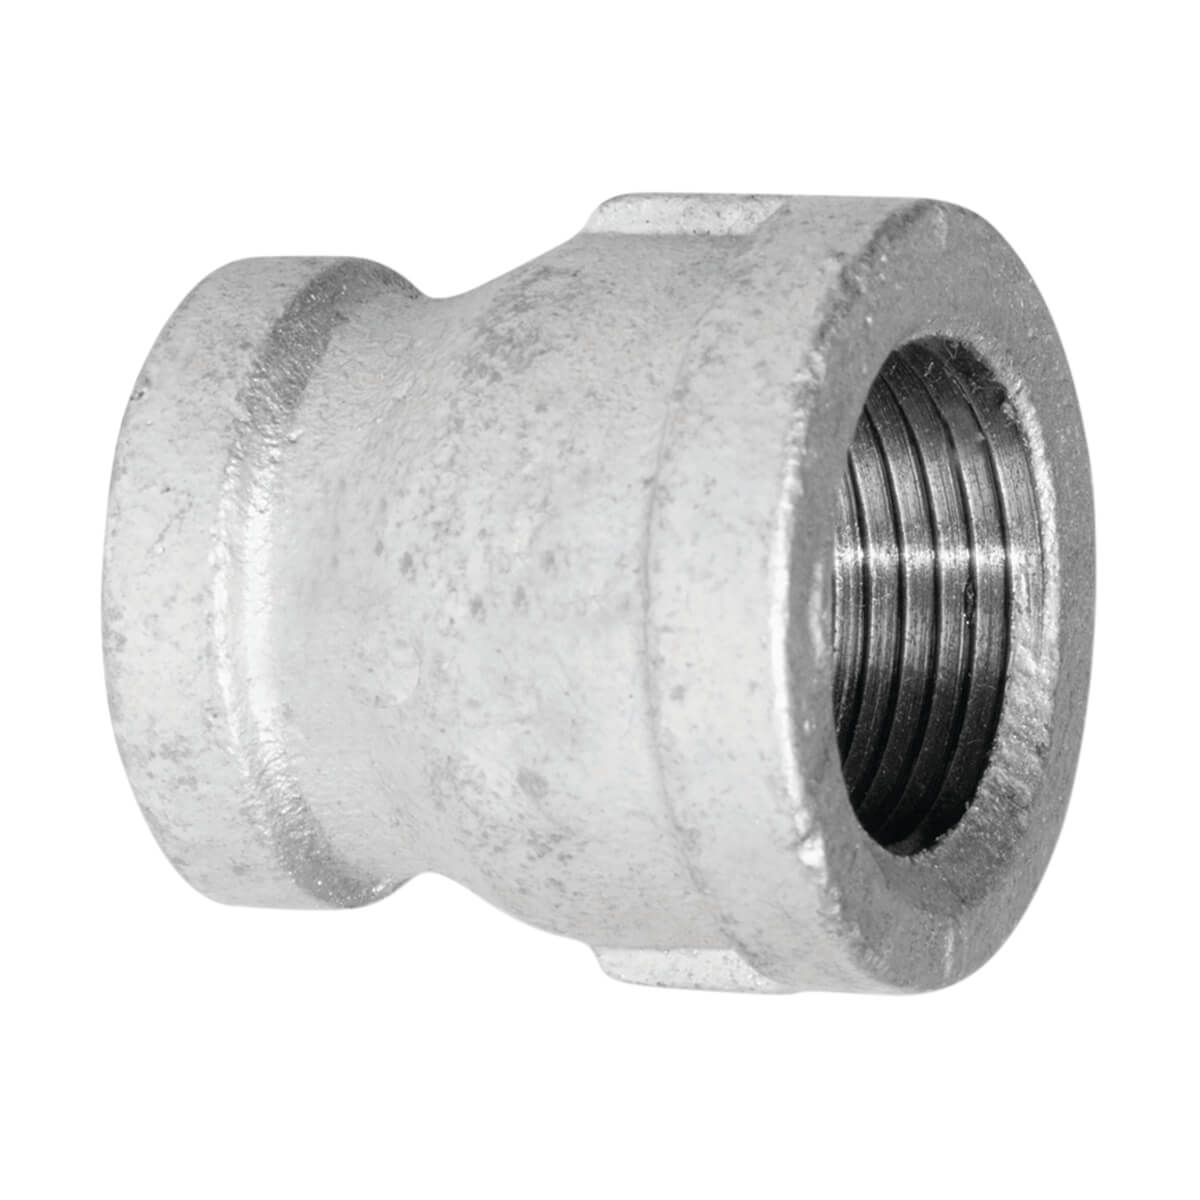 Fitting Galvanized Iron Coupling - 3/4-in x 1/2-in